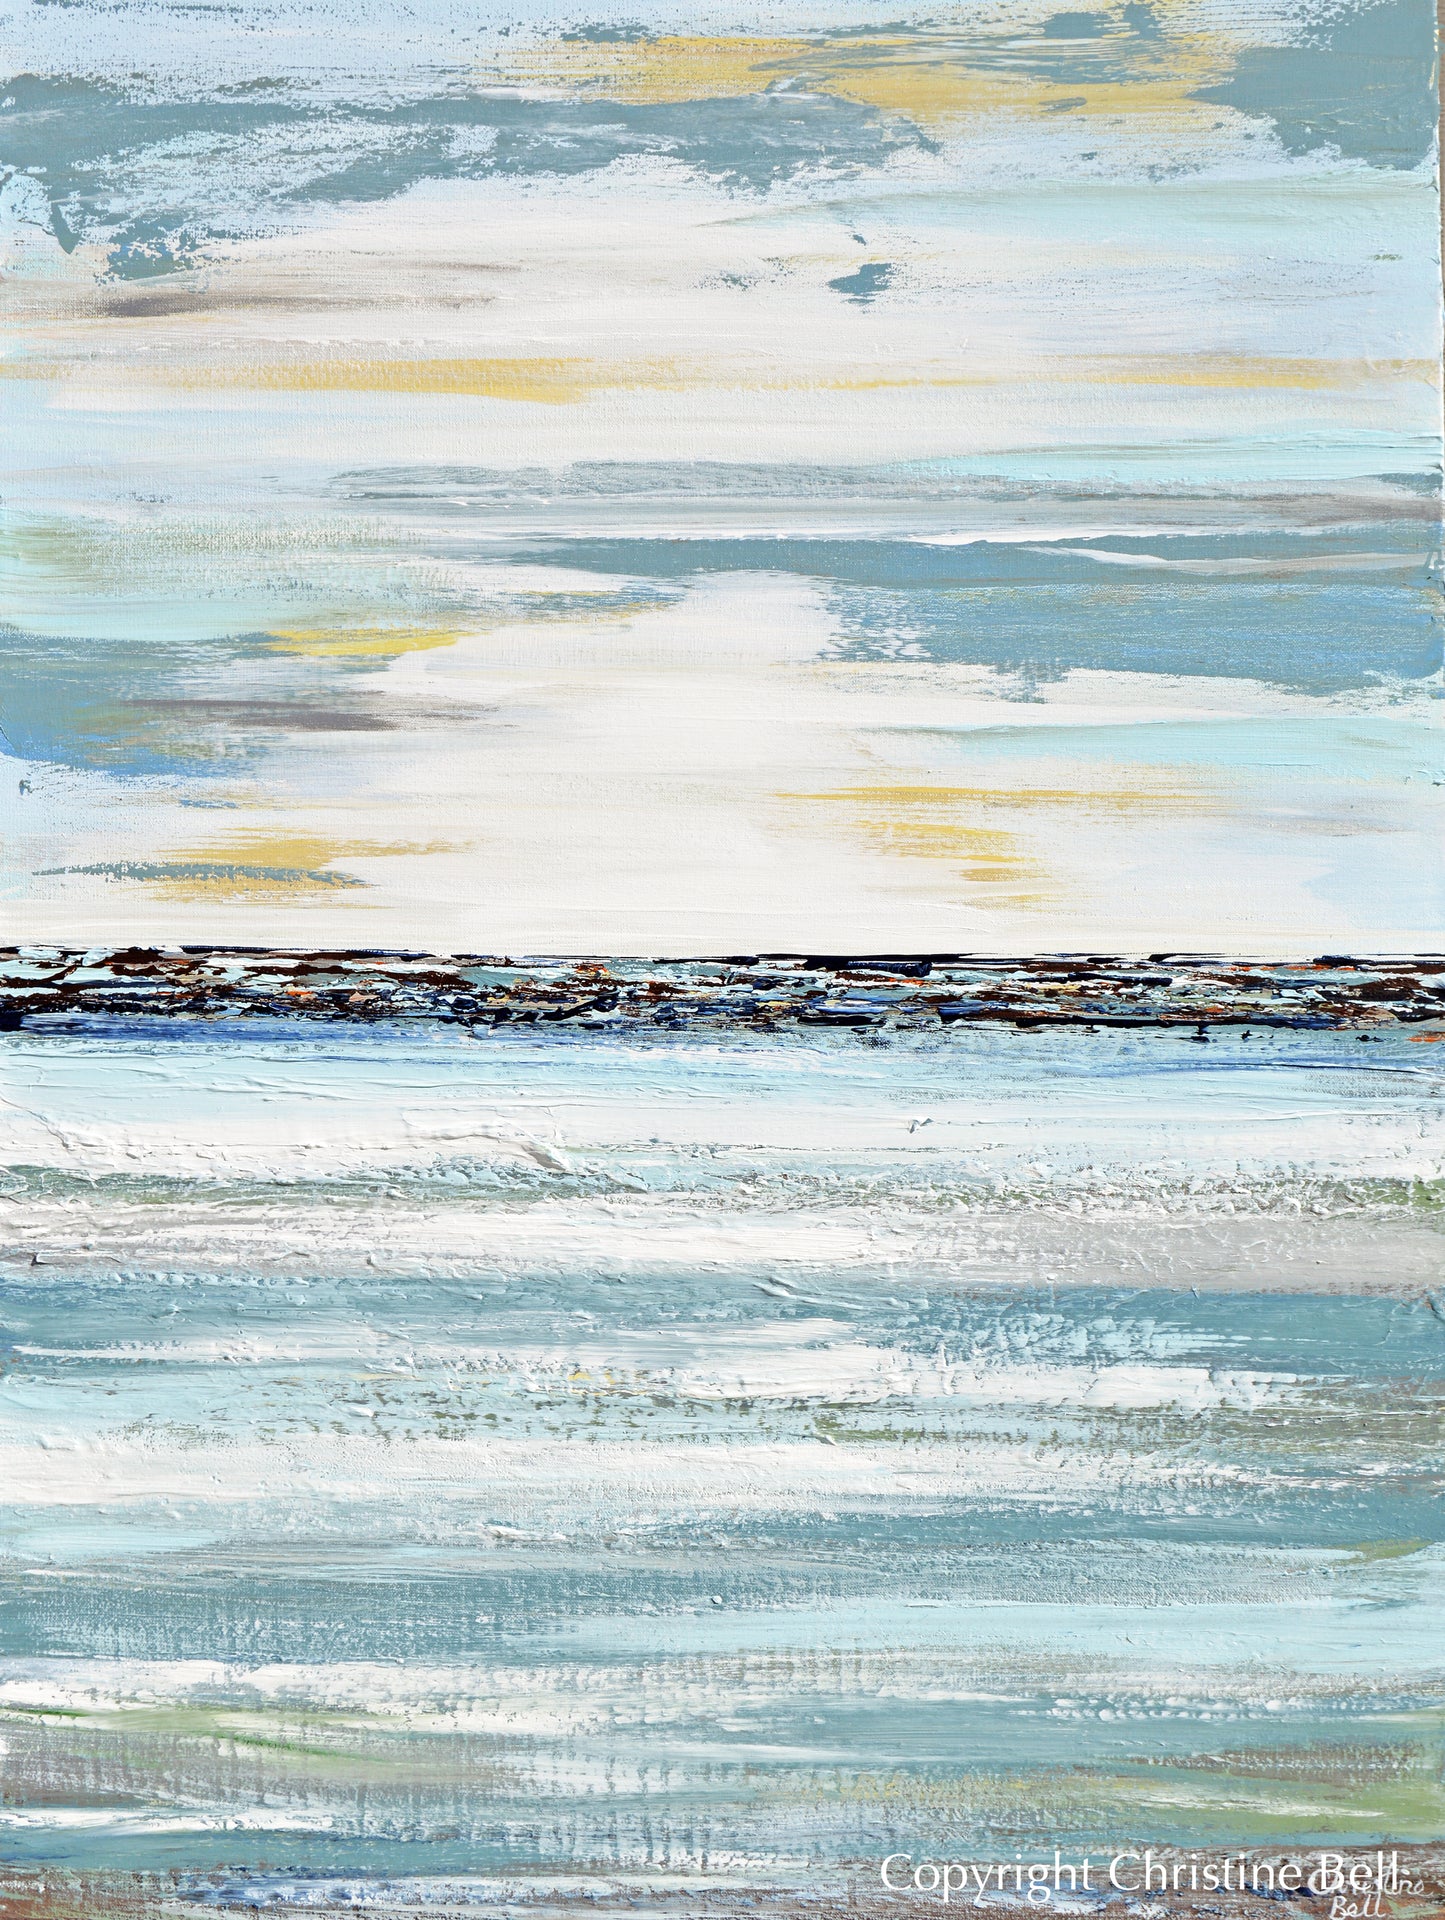 "Contentment" ORIGINAL Art Coastal Abstract Painting Textured Light Blue Teal White 30x40"